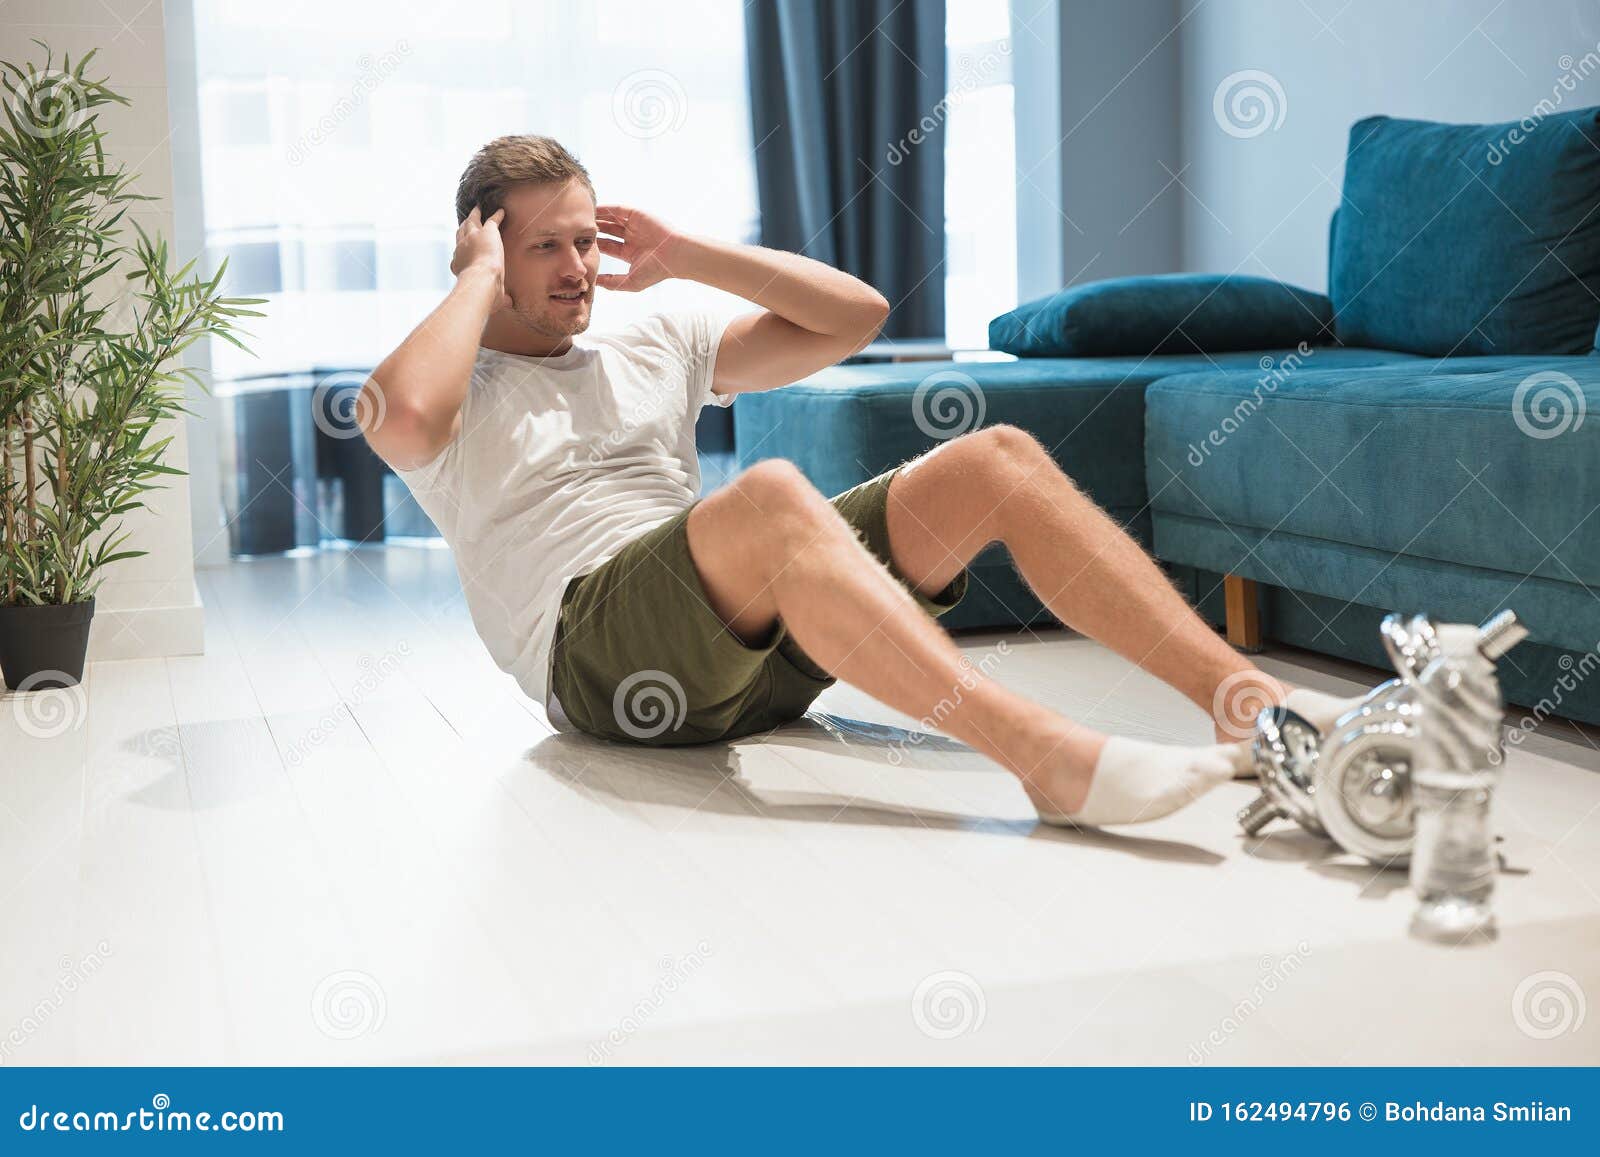 Young Handsome Man Doing Abdominal Crunches On The Floor During